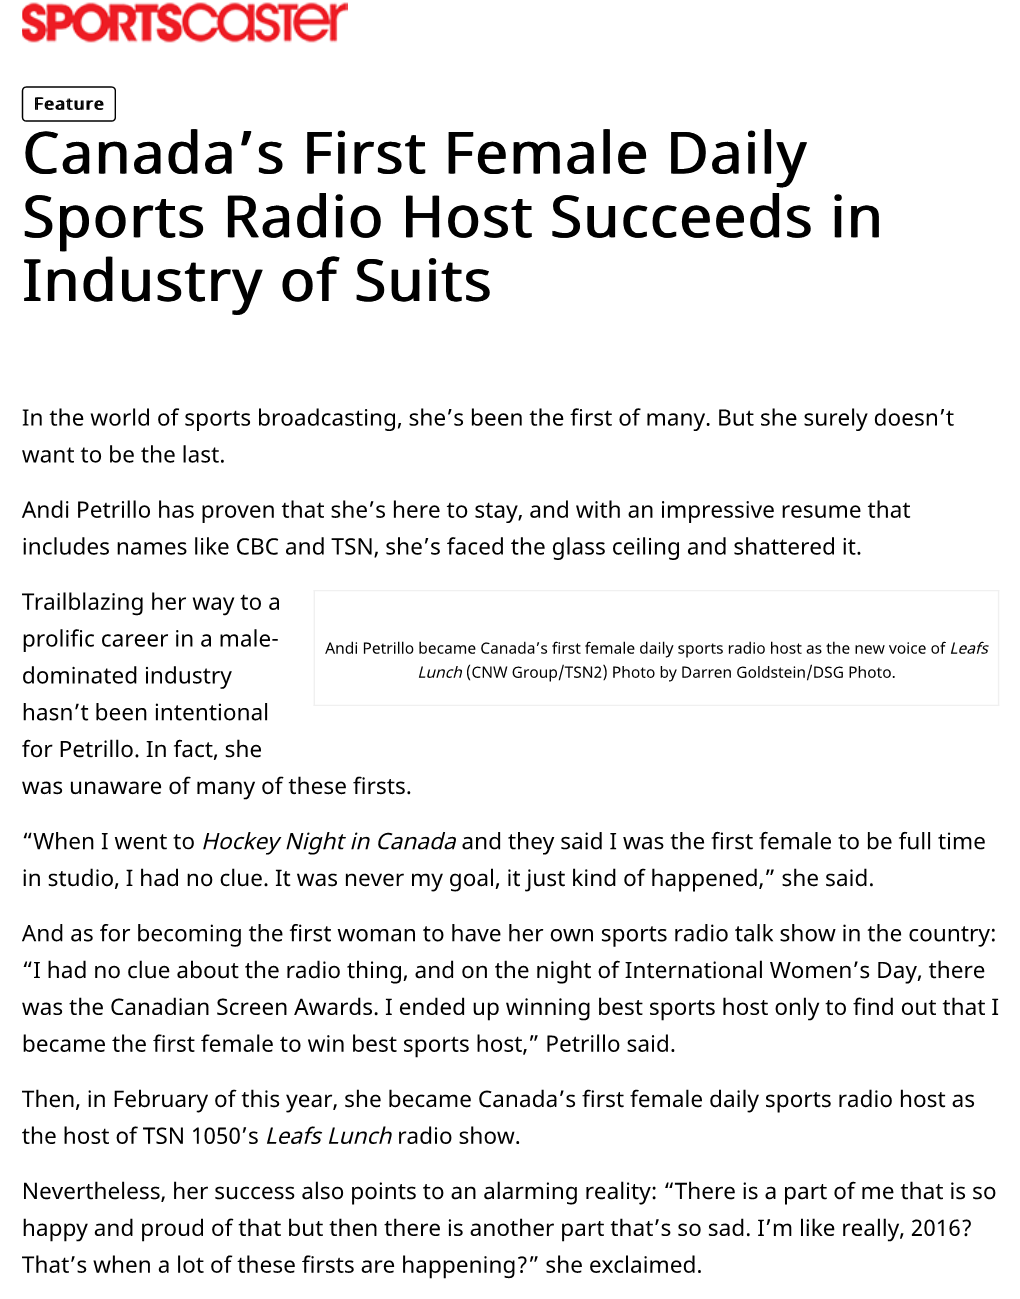 Canada's First Female Daily Sports Radio Host Succeeds in Industry Of